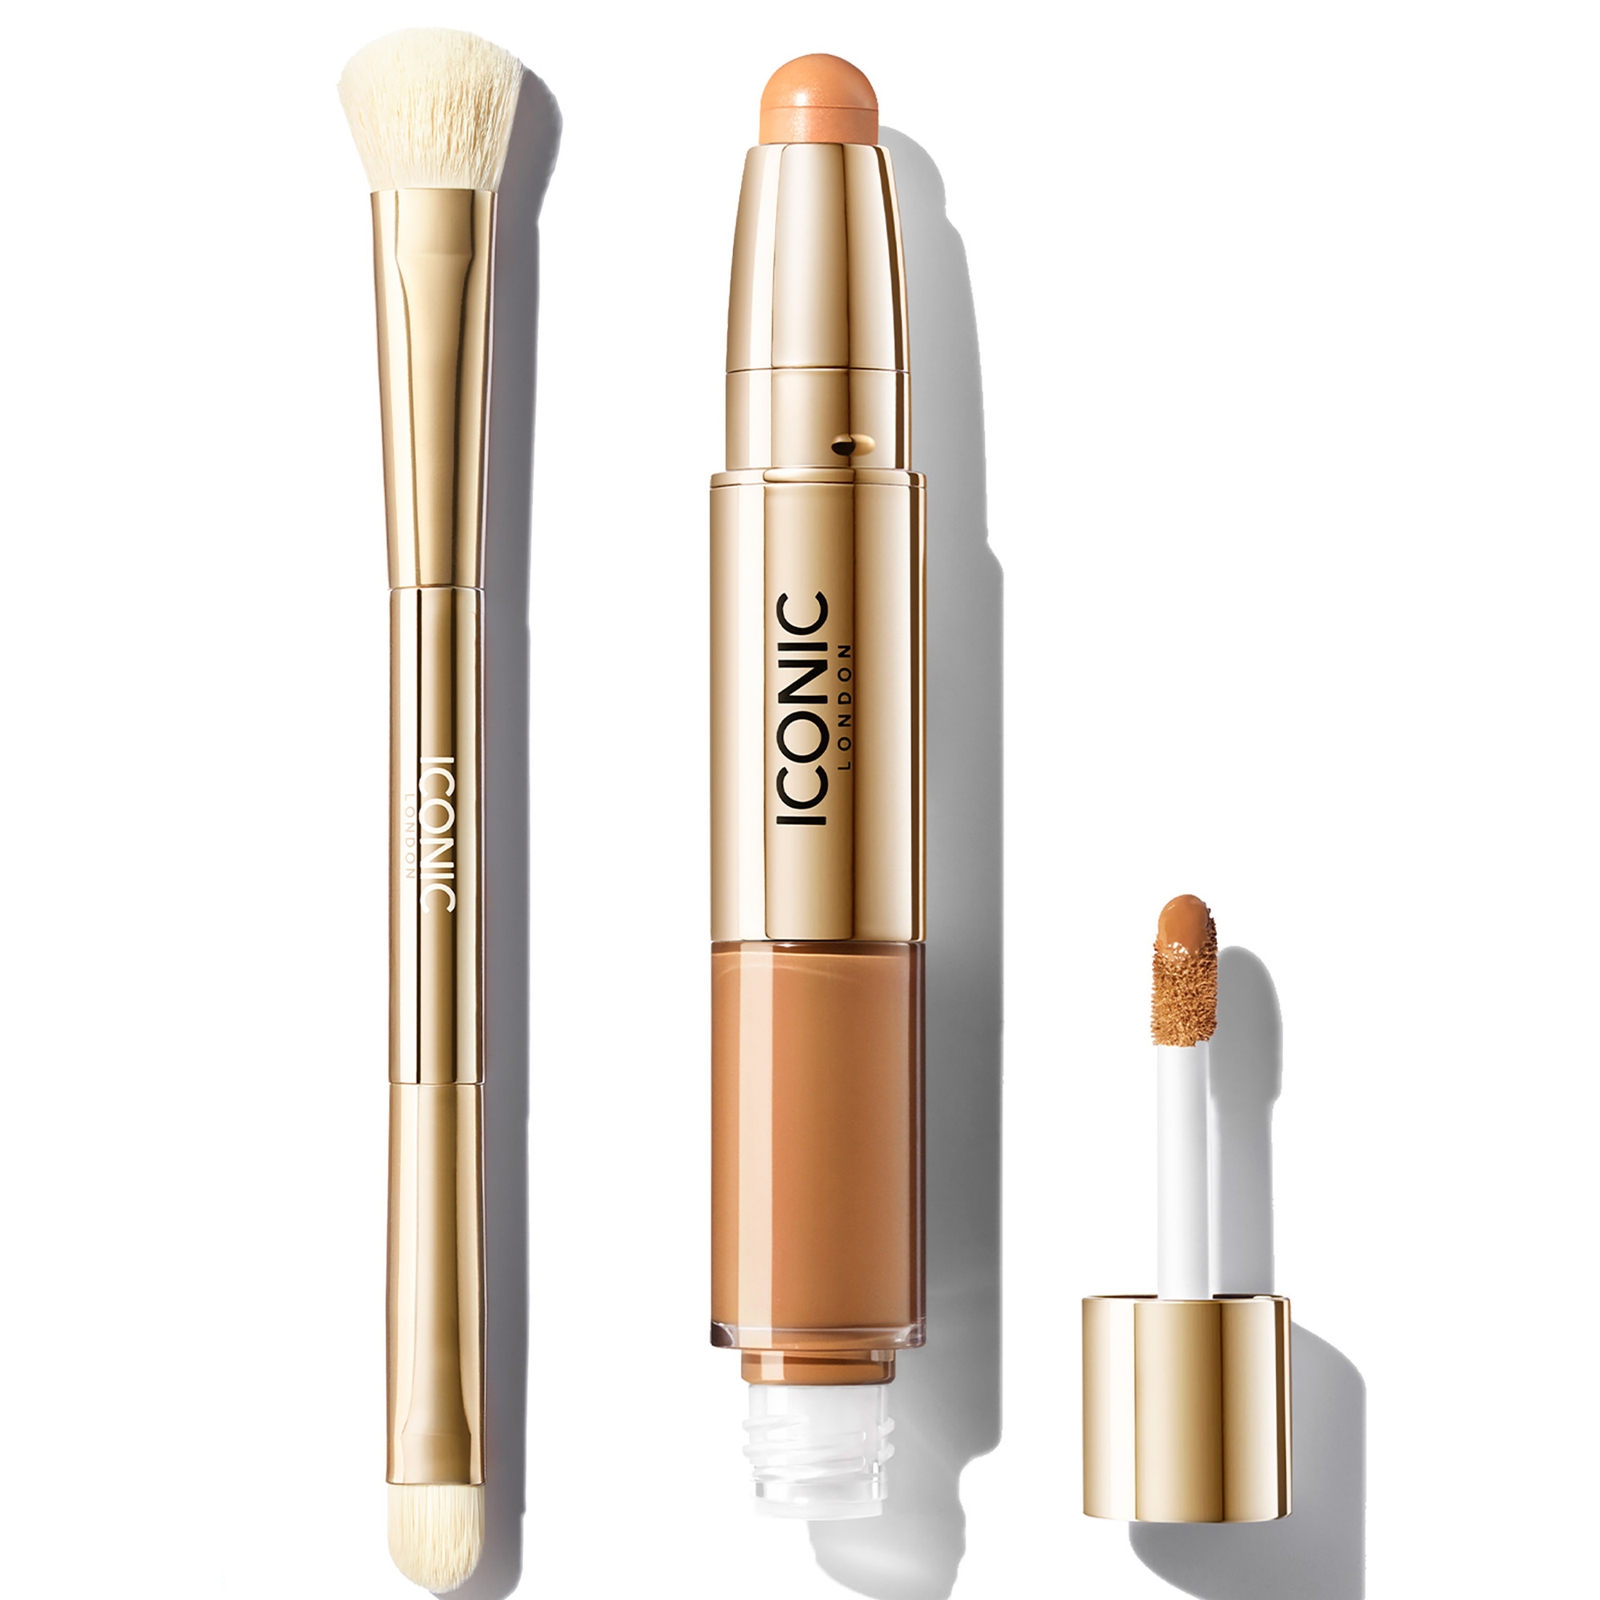 Iconic London Radiant Concealer And Brush Bundle (various Shades) - Neutral Tan